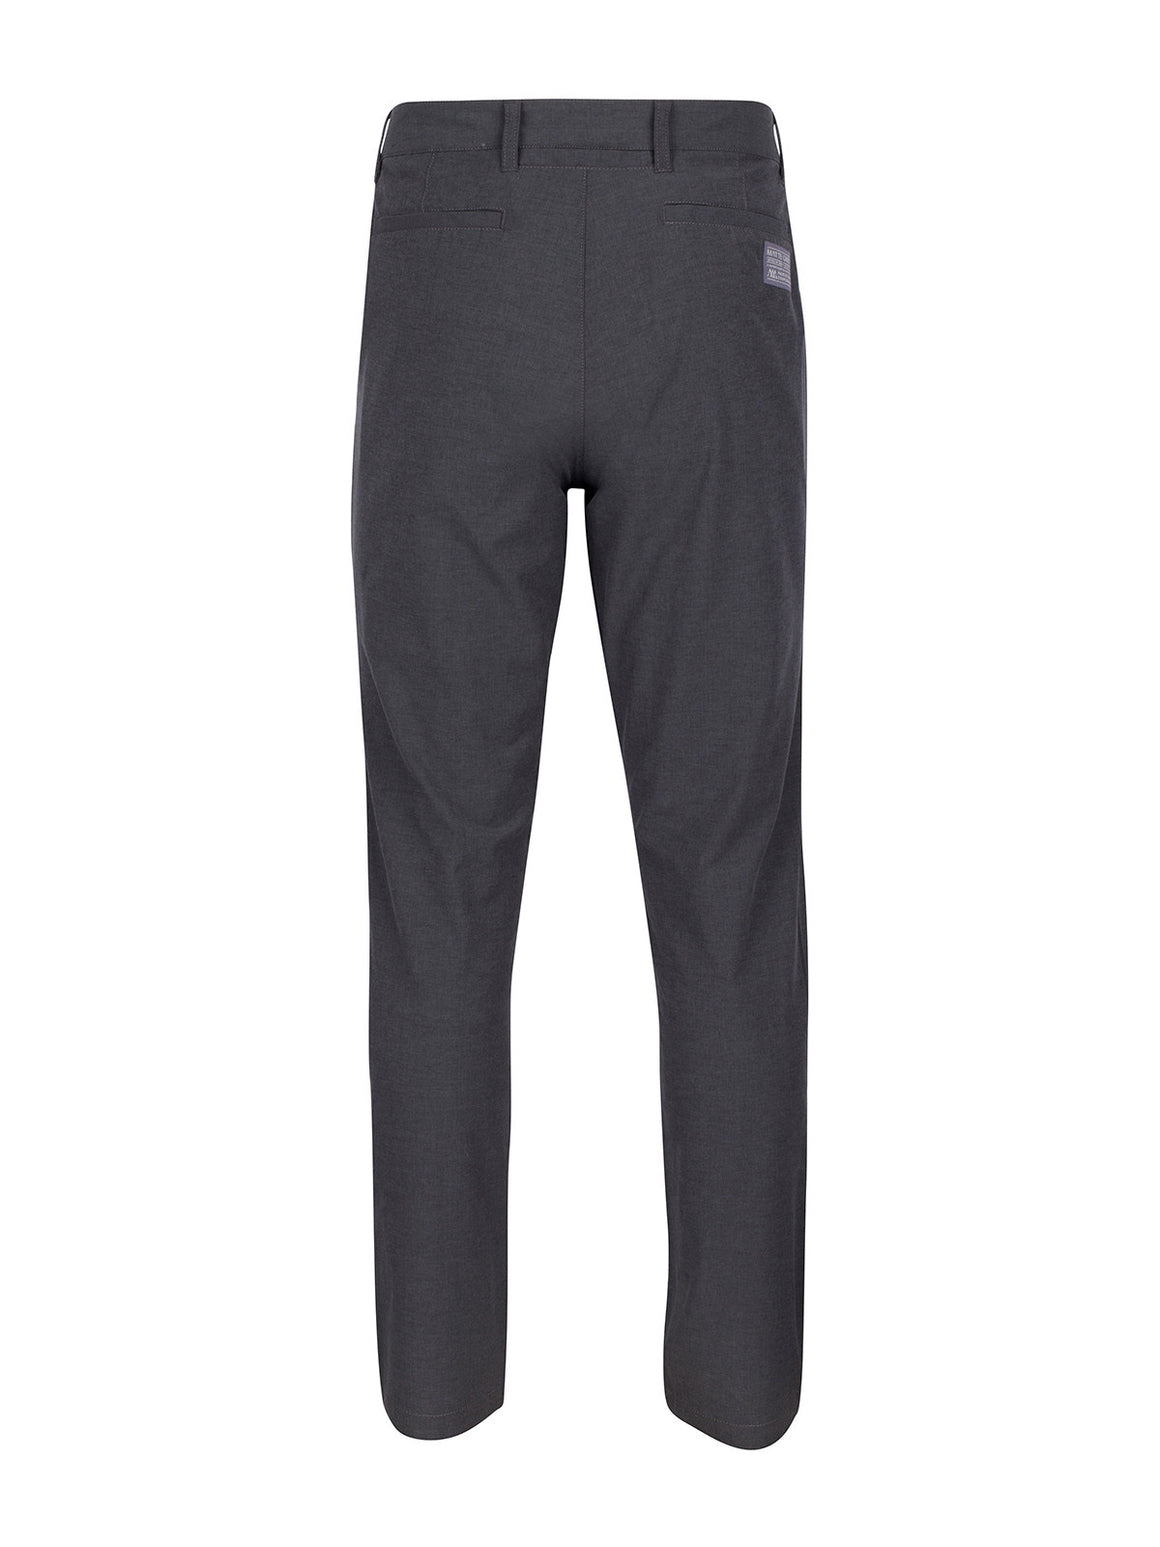 Traveler FIT101 Pant -  Shadow